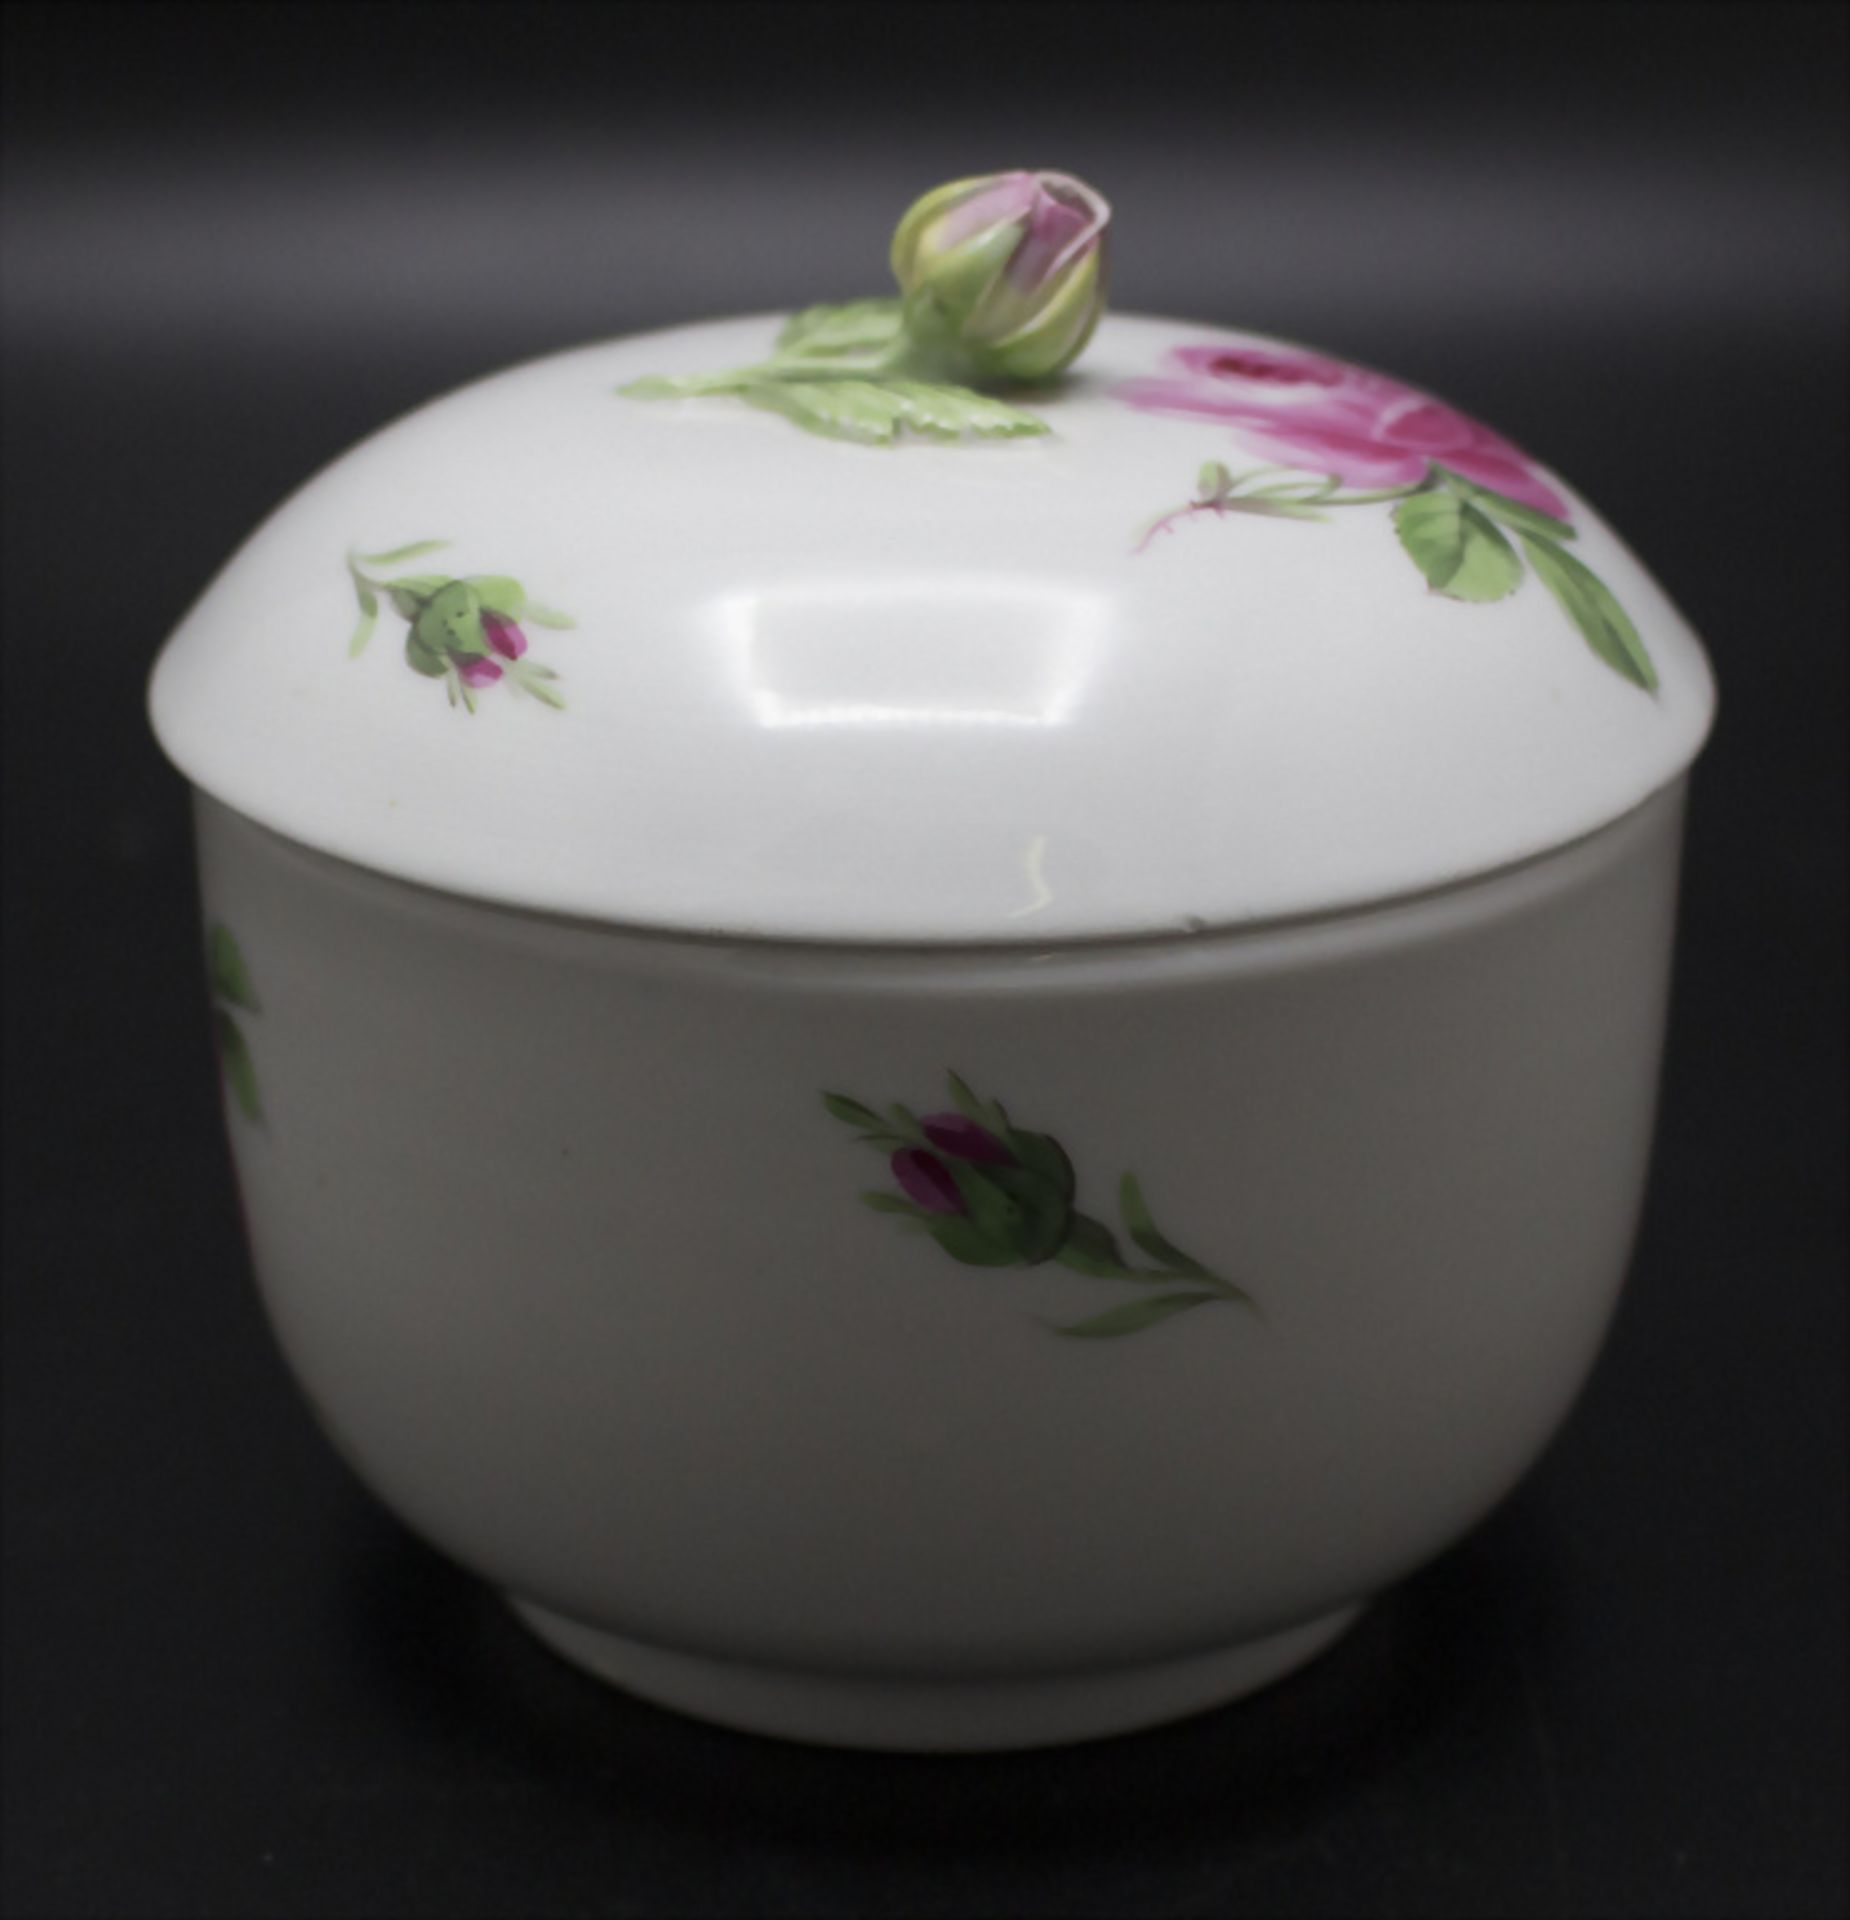 Zuckerdose 'Rote Rose' / A lidded sugar bowl with roses, Meissen, 2. Hälfte 19. Jh. - Image 5 of 5